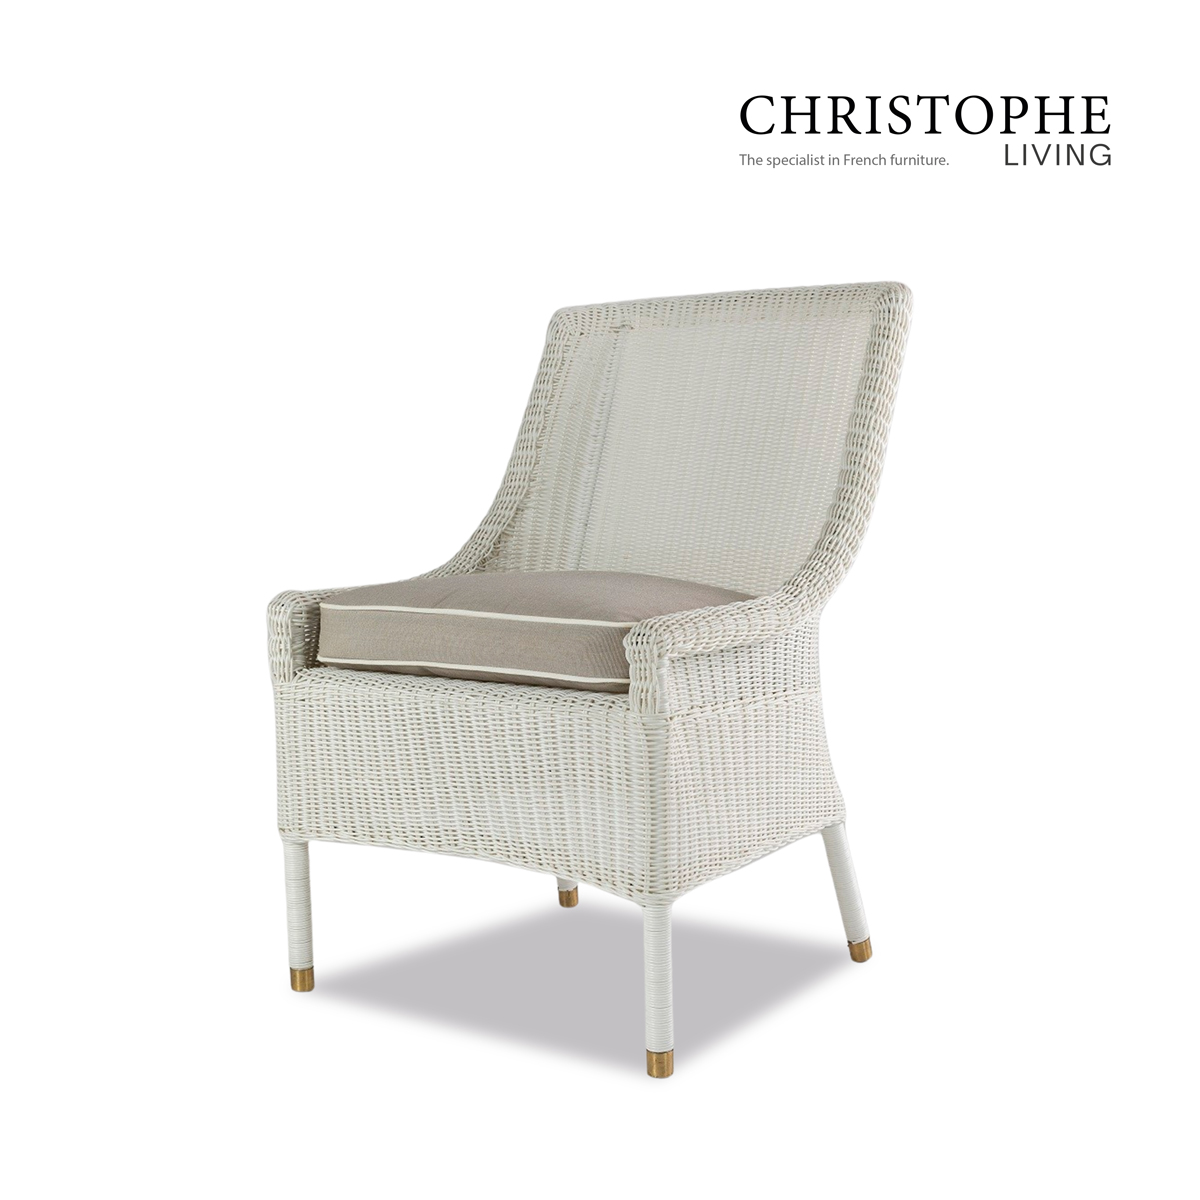 Hyams Coastal Outdoor Dining Chair in White Synthetic Rattan and Wicker